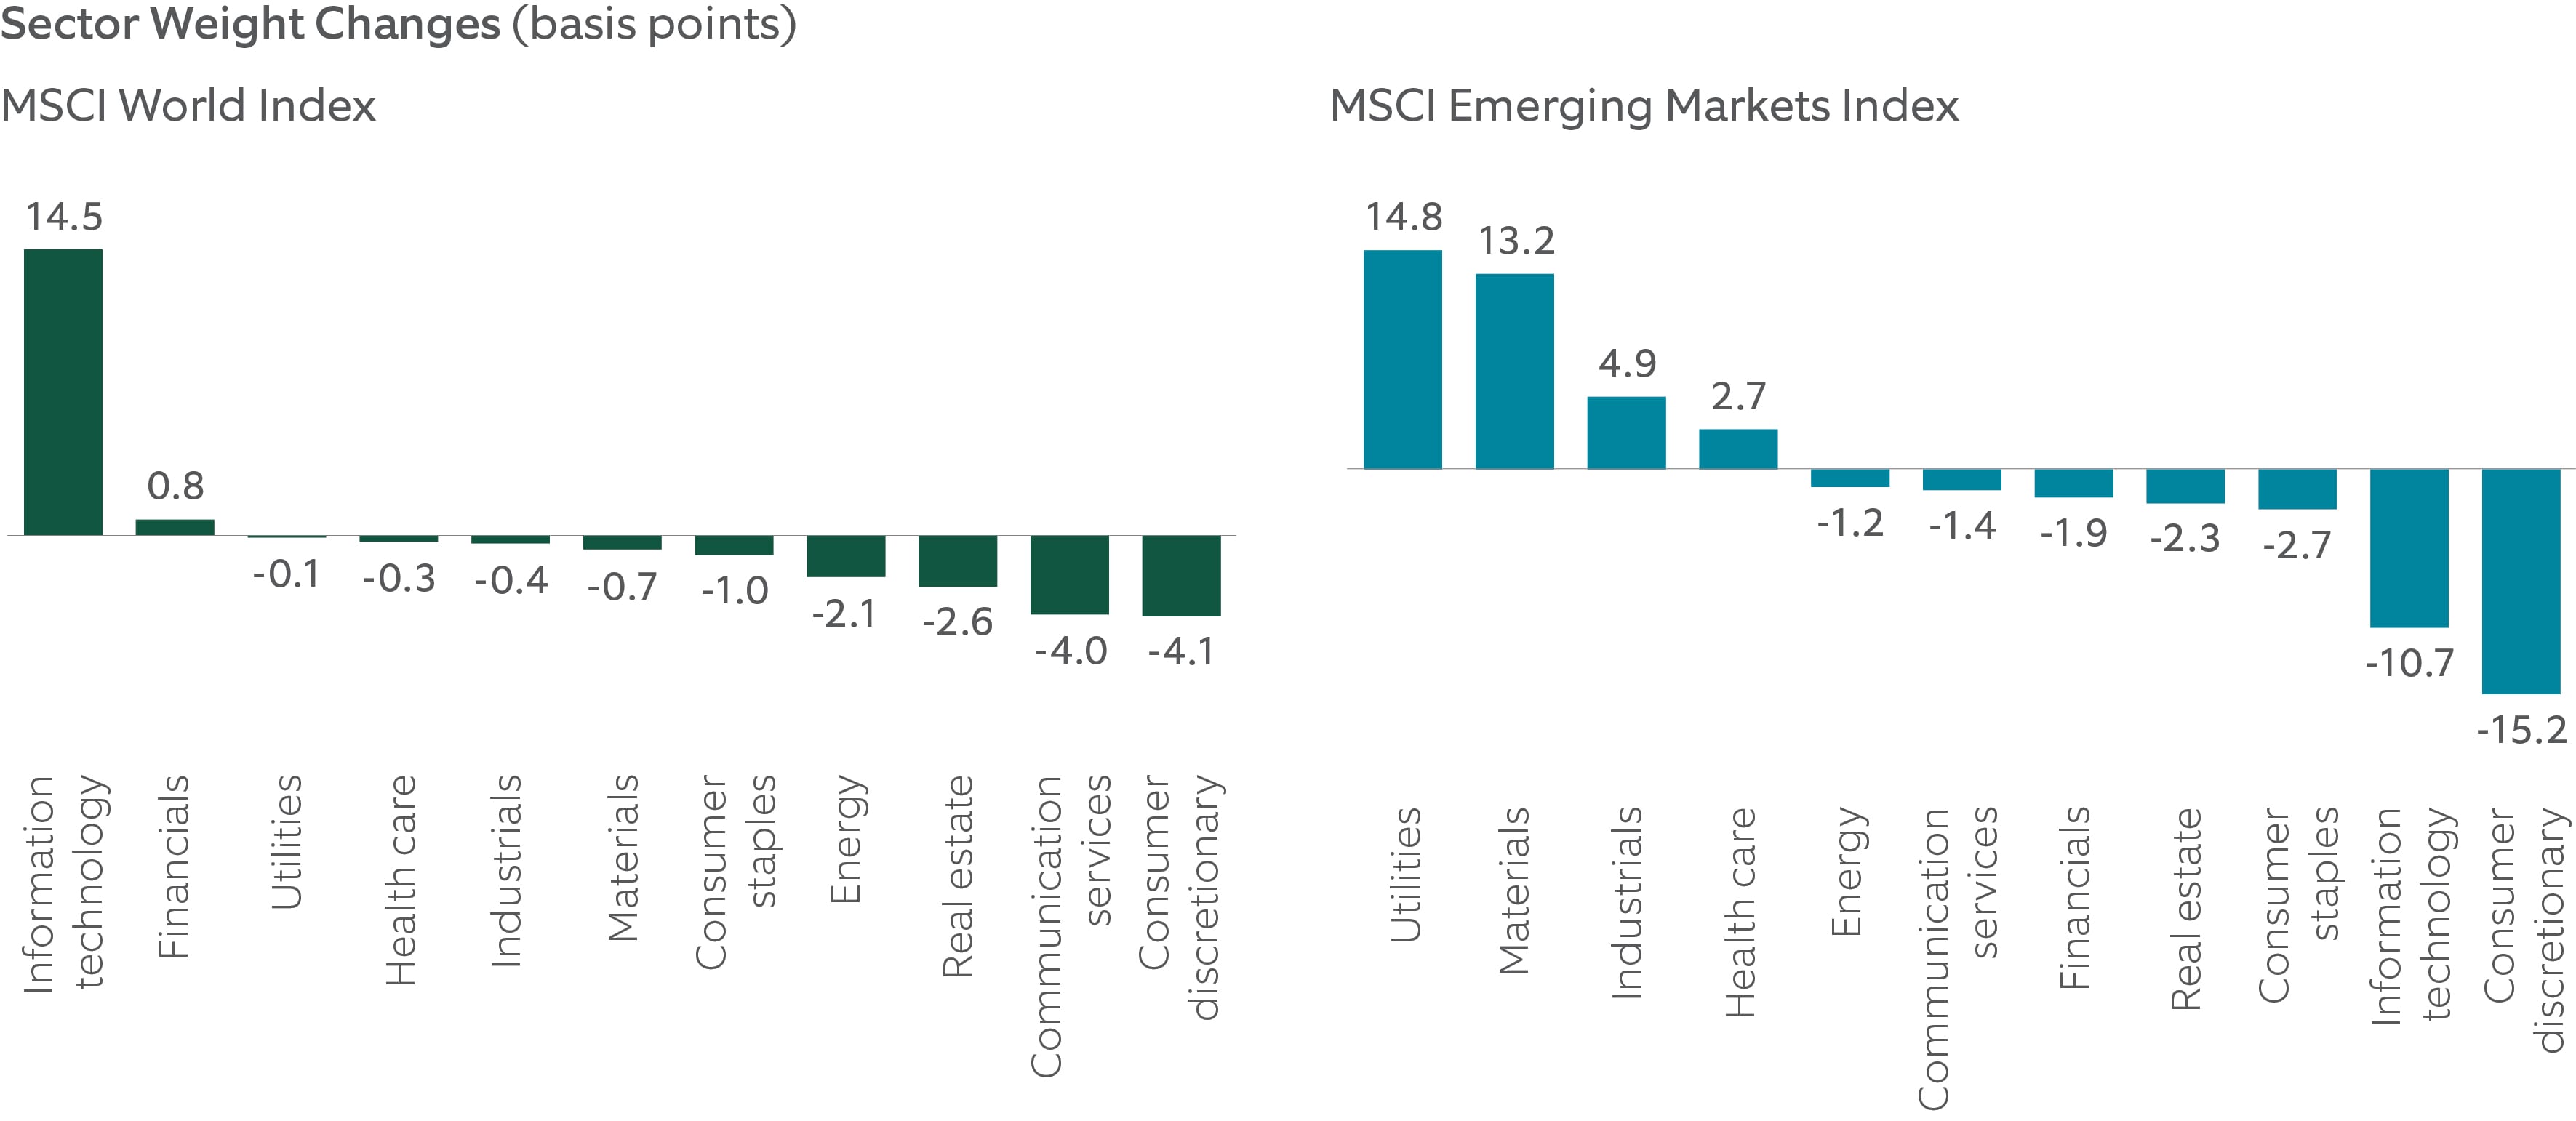 sector weights of msci world compared to msci emerging markets